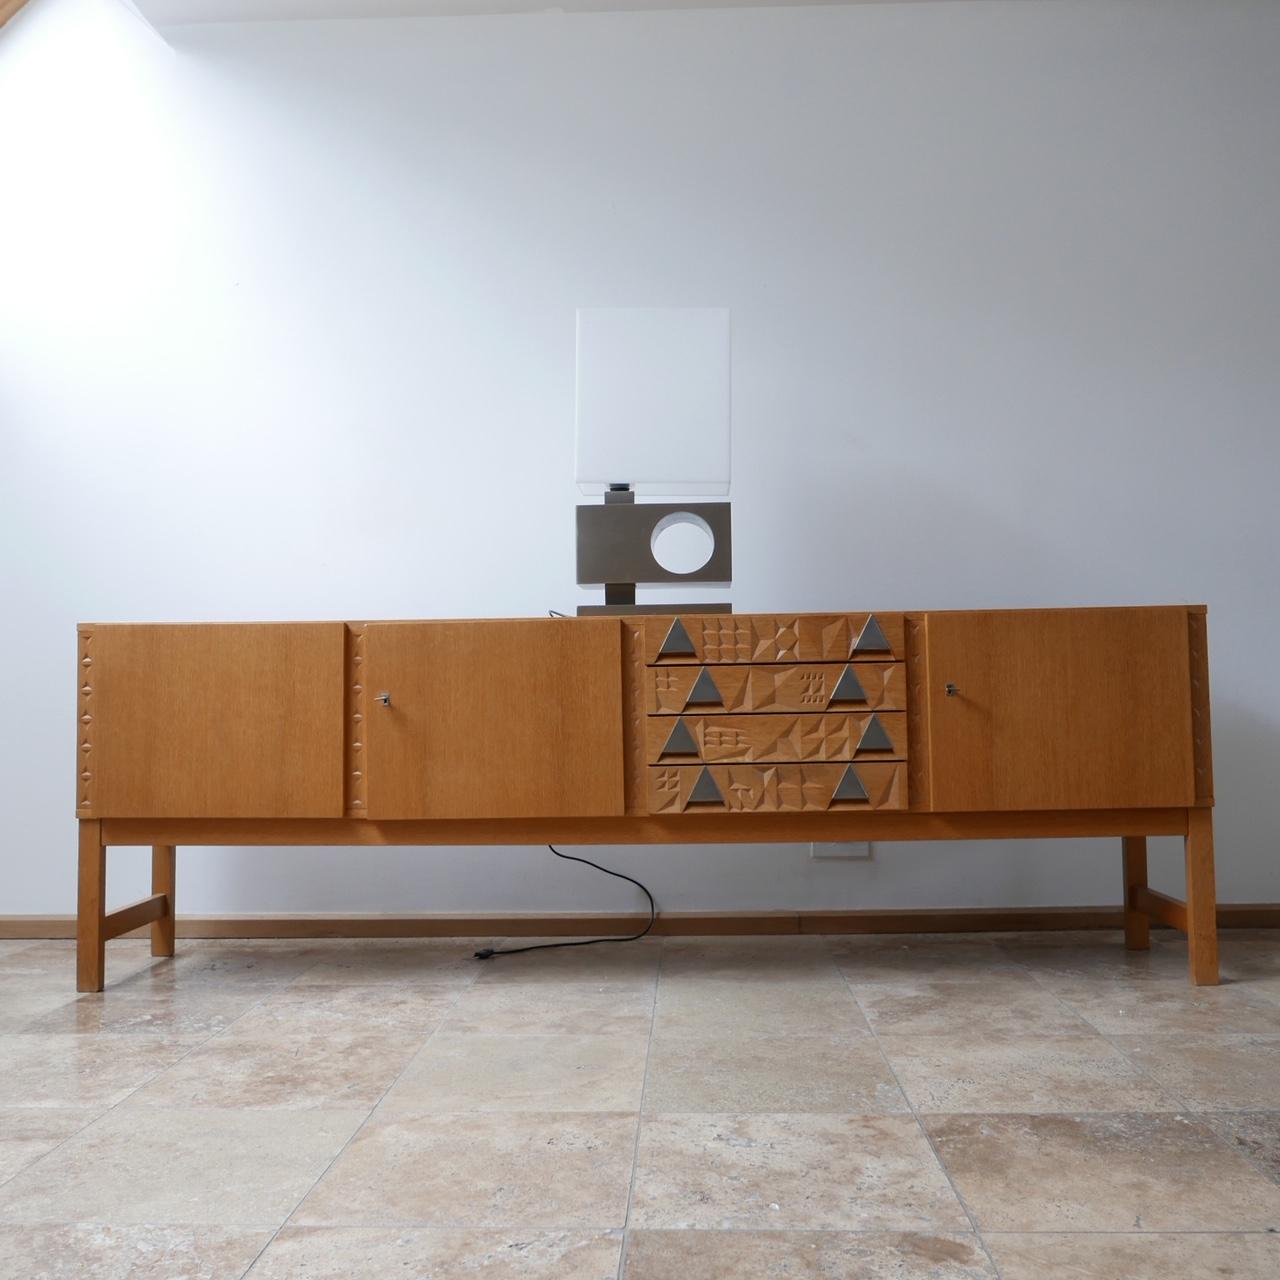 A good quality French midcentury credenza/sideboard.

Blonde wood, likely veneered oak.

Original keys and locks.

Good condition. Functional and stylish.

Internally there is a markers logo.

Dimensions: 240 W x 79 H x 45 D in cm.
   